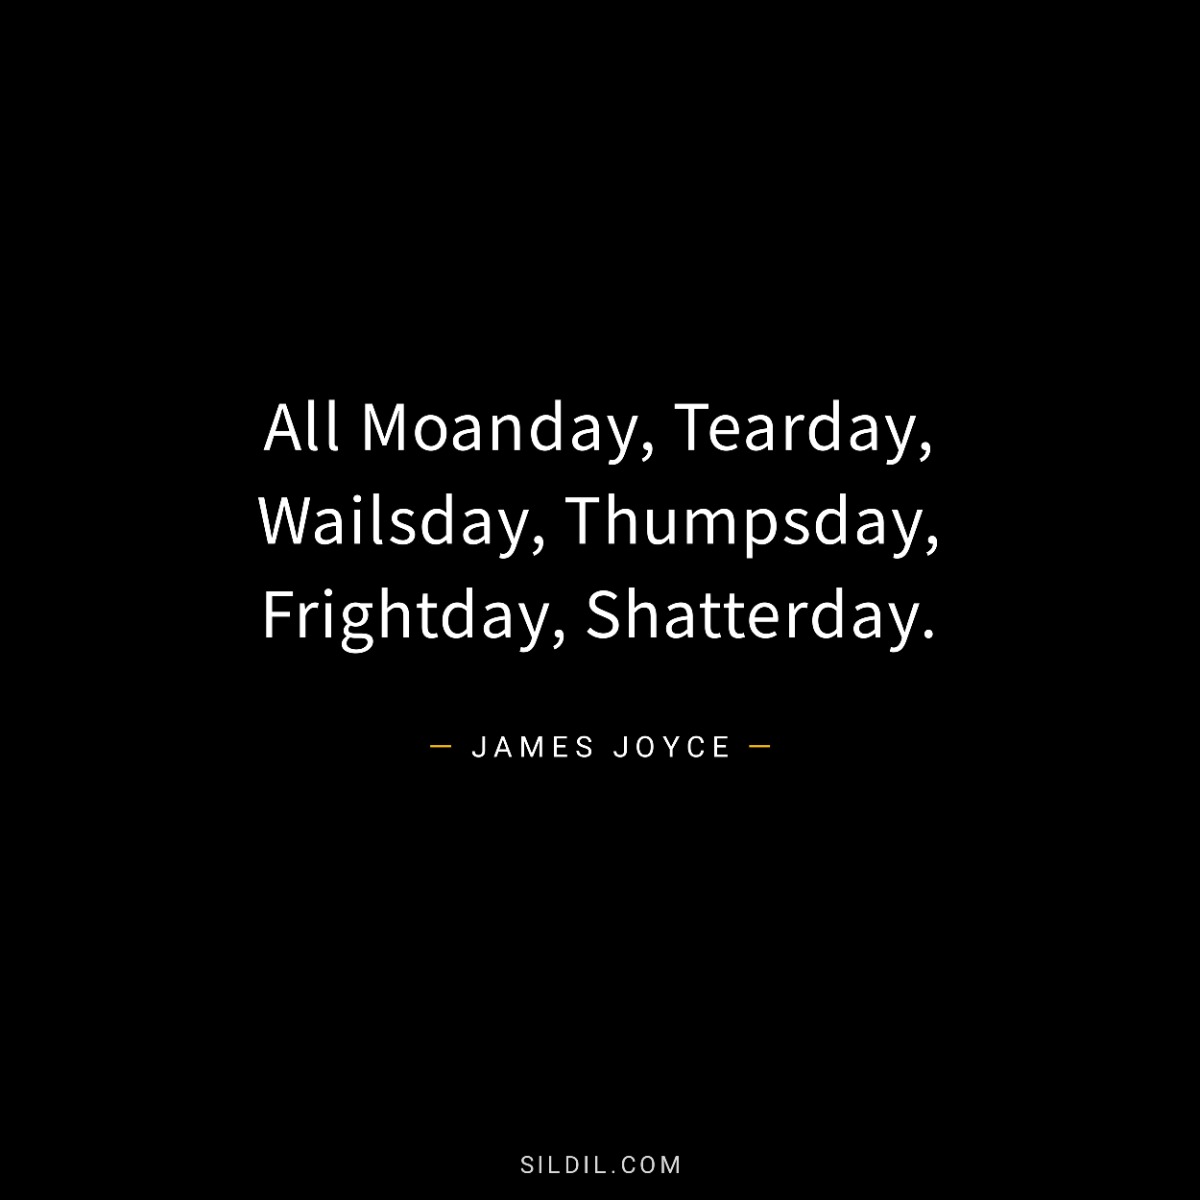 All Moanday, Tearday, Wailsday, Thumpsday, Frightday, Shatterday.